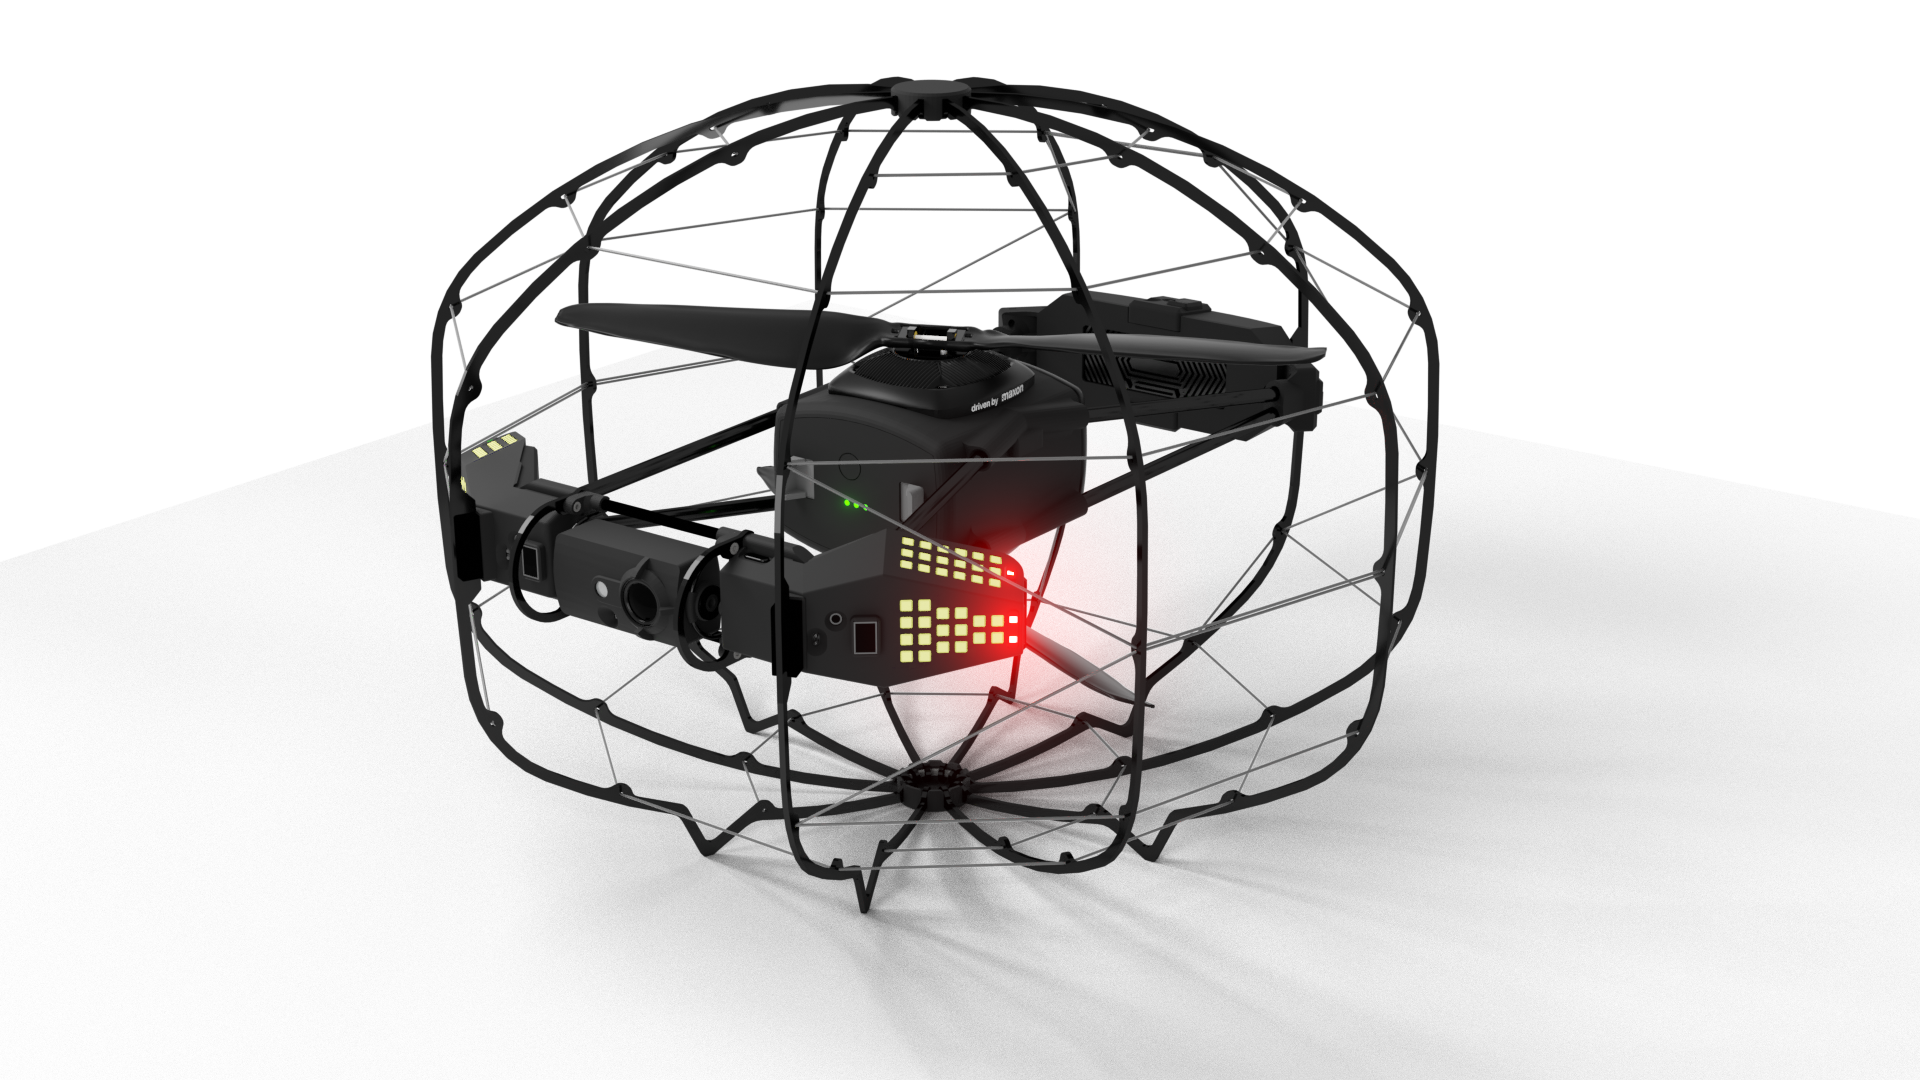 The ASIO drone manufactured by Flybotix.